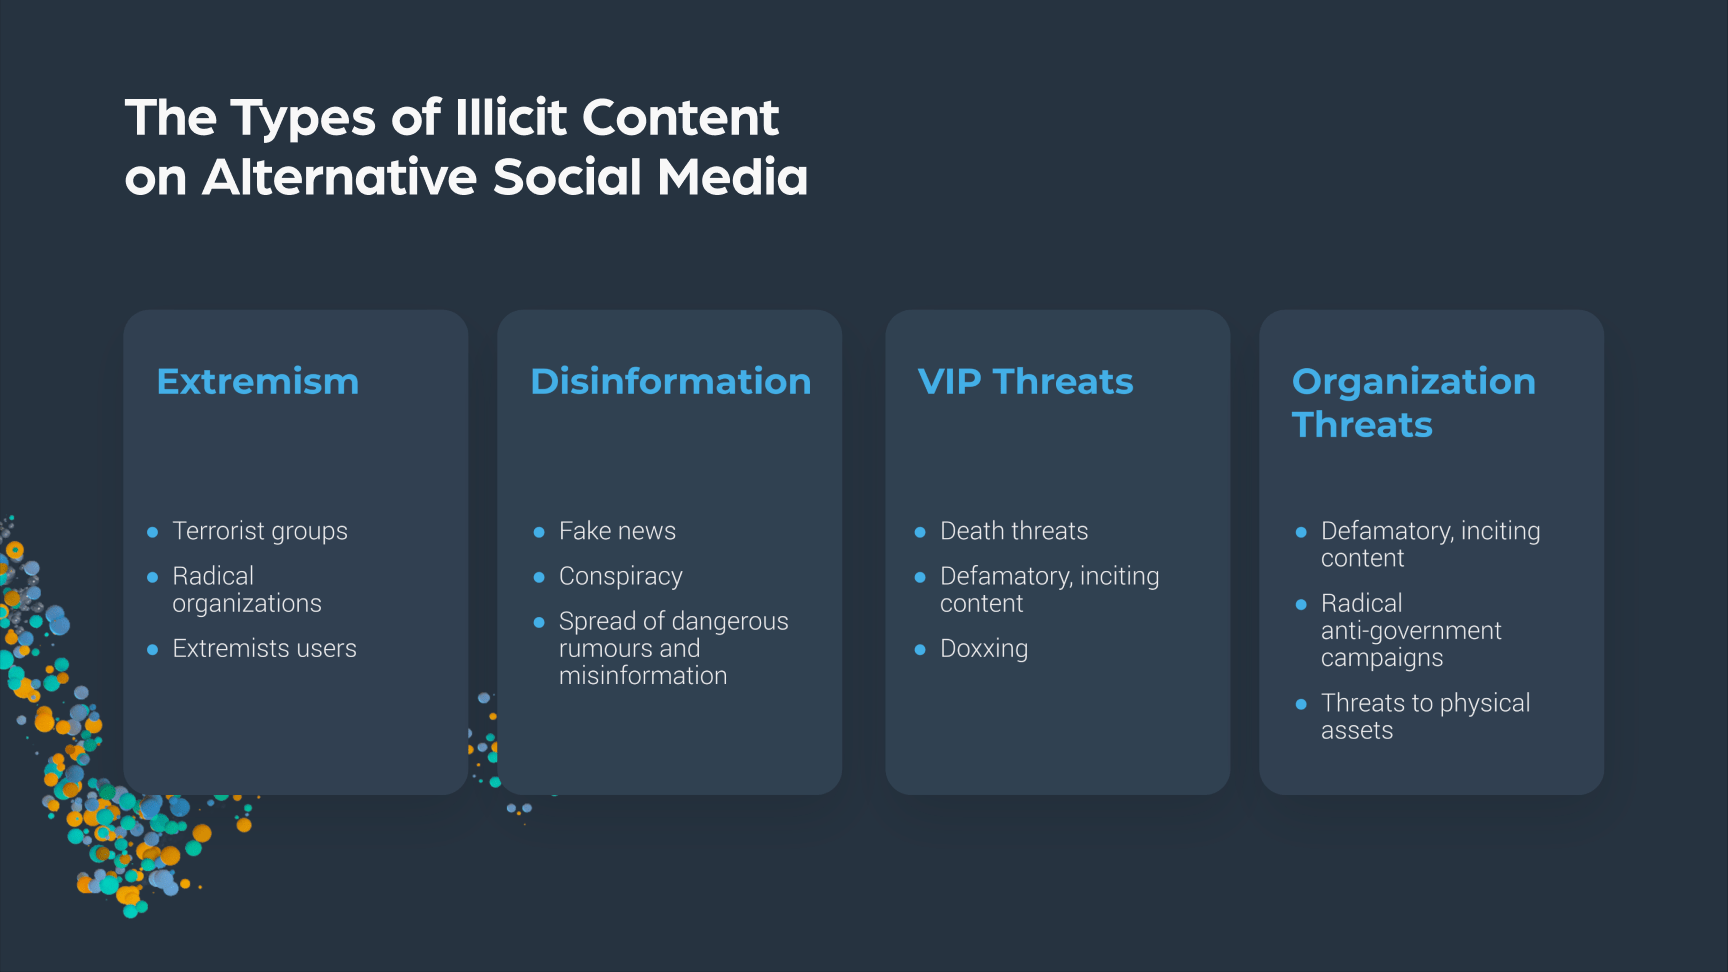 The types of illicit content on alternative social media